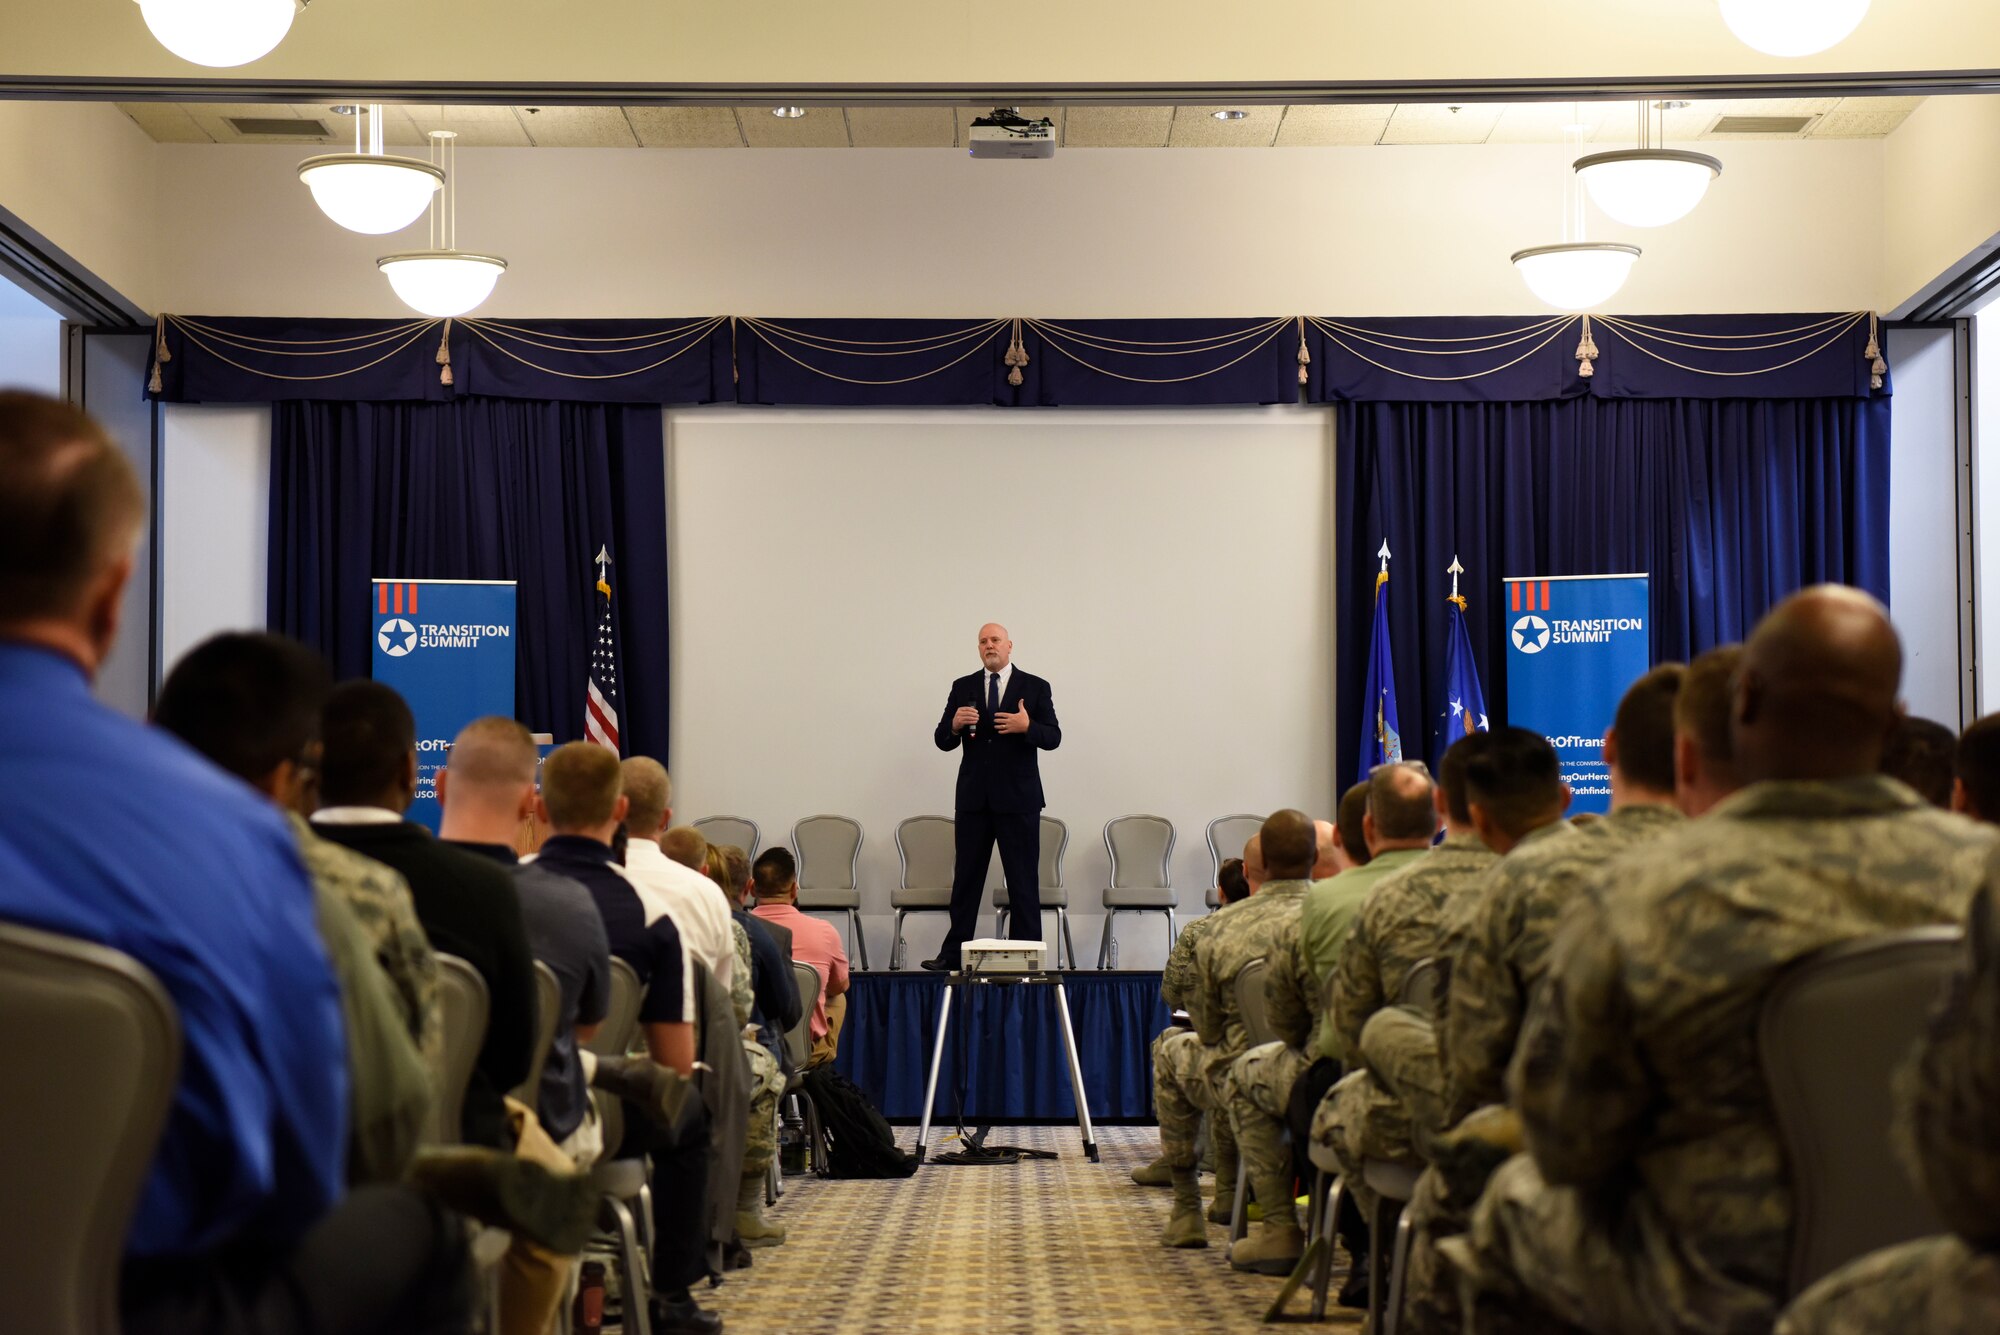 John Fedrigo, Director of Air Force Review Boards, Office of the Assistant Secretary of the Air Force for Manpower and Reserve Affairs, gave opening remarks during the Hiring Our Heroes Military Transition Summit April 12, 2018, at Dover Air Force Base, Del. Fedrigo spoke about the benefits of serving in the military when it comes time to look for a job in the civilian sector. (U.S. Air Force photo by Airman 1st Class Zoe M. Wockenfuss)